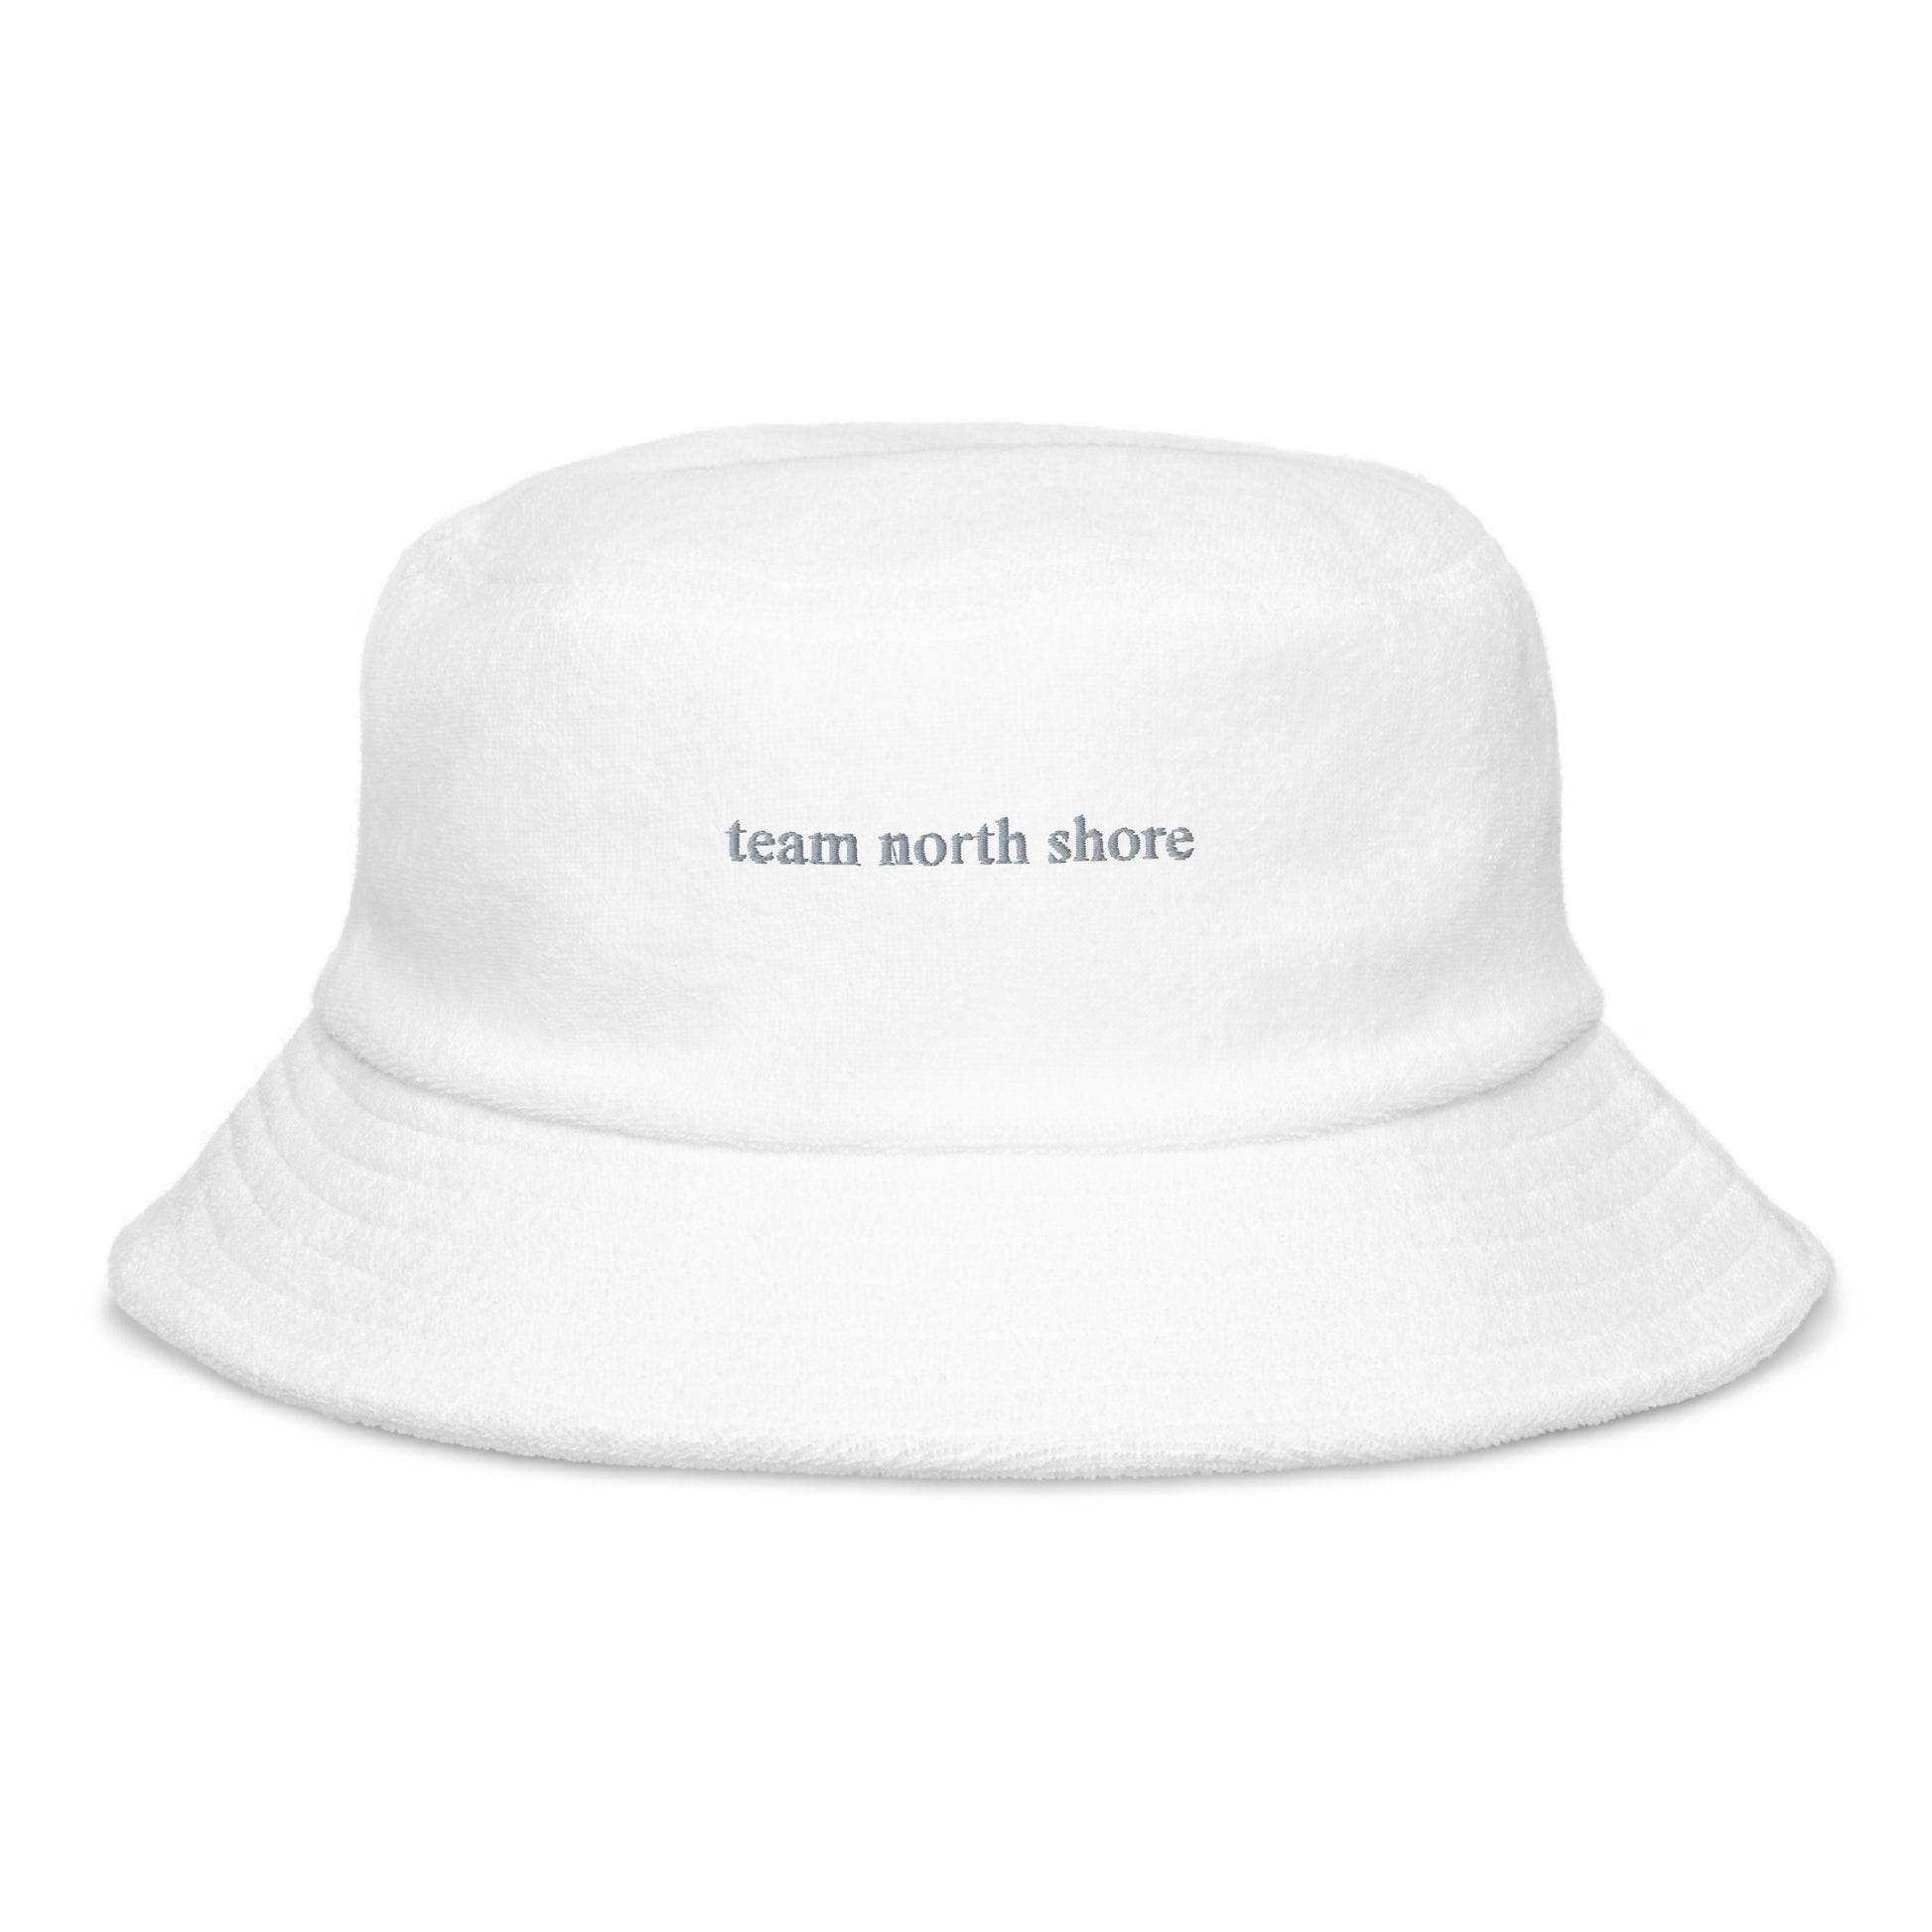 white bucket hat that says "team north shore" in grey lettering